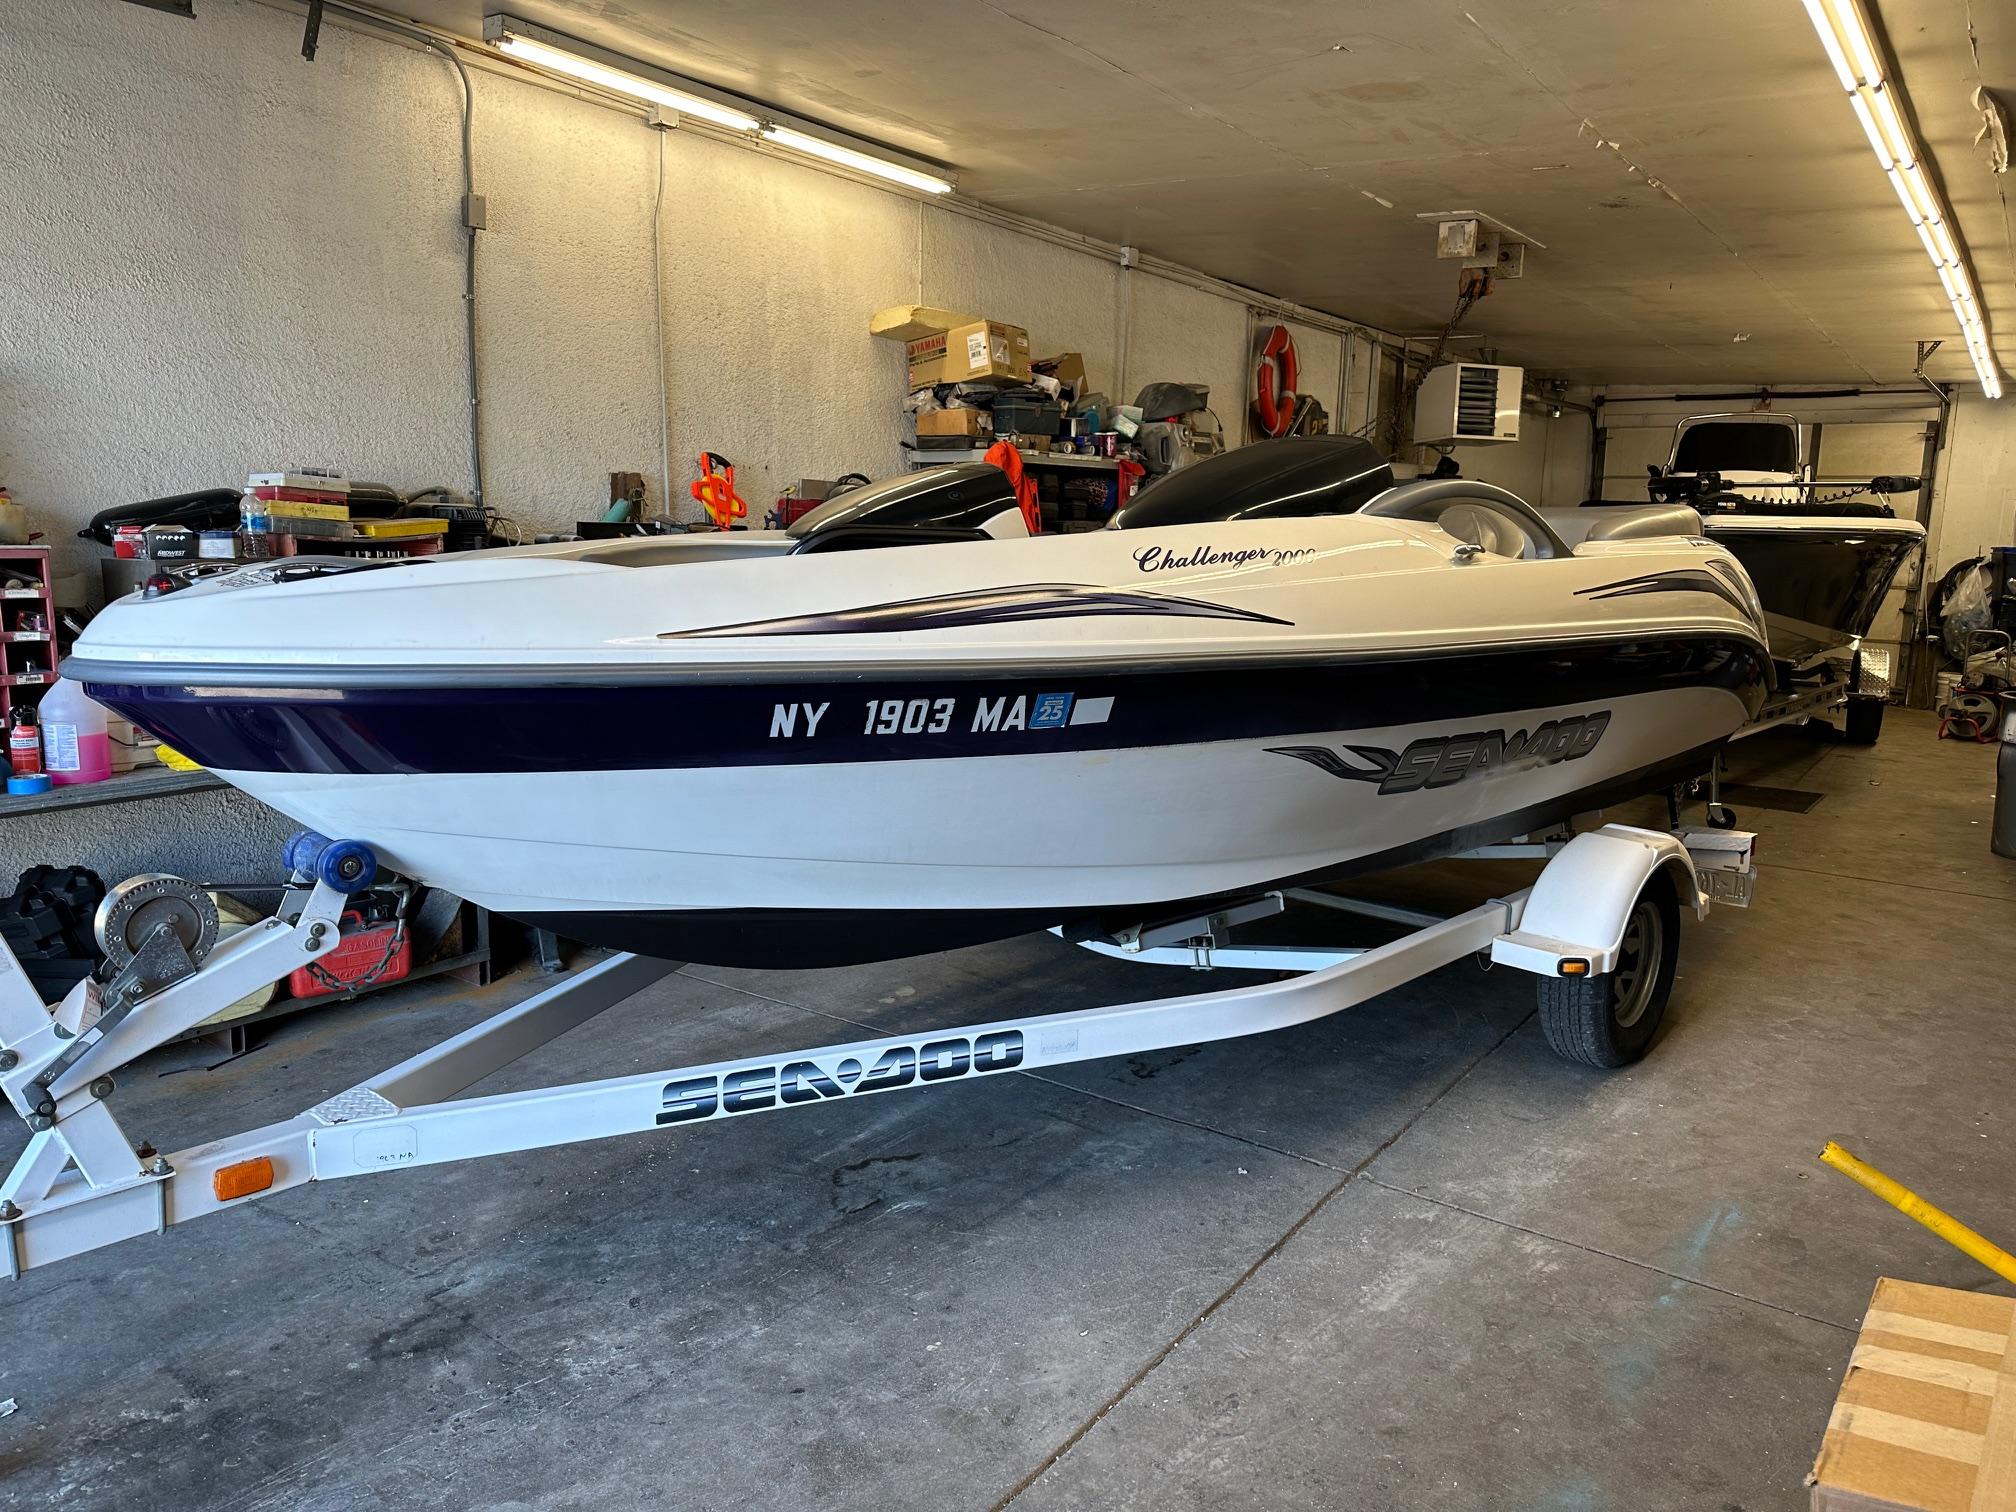 Sea-Doo 180 boats for sale - Boat Trader